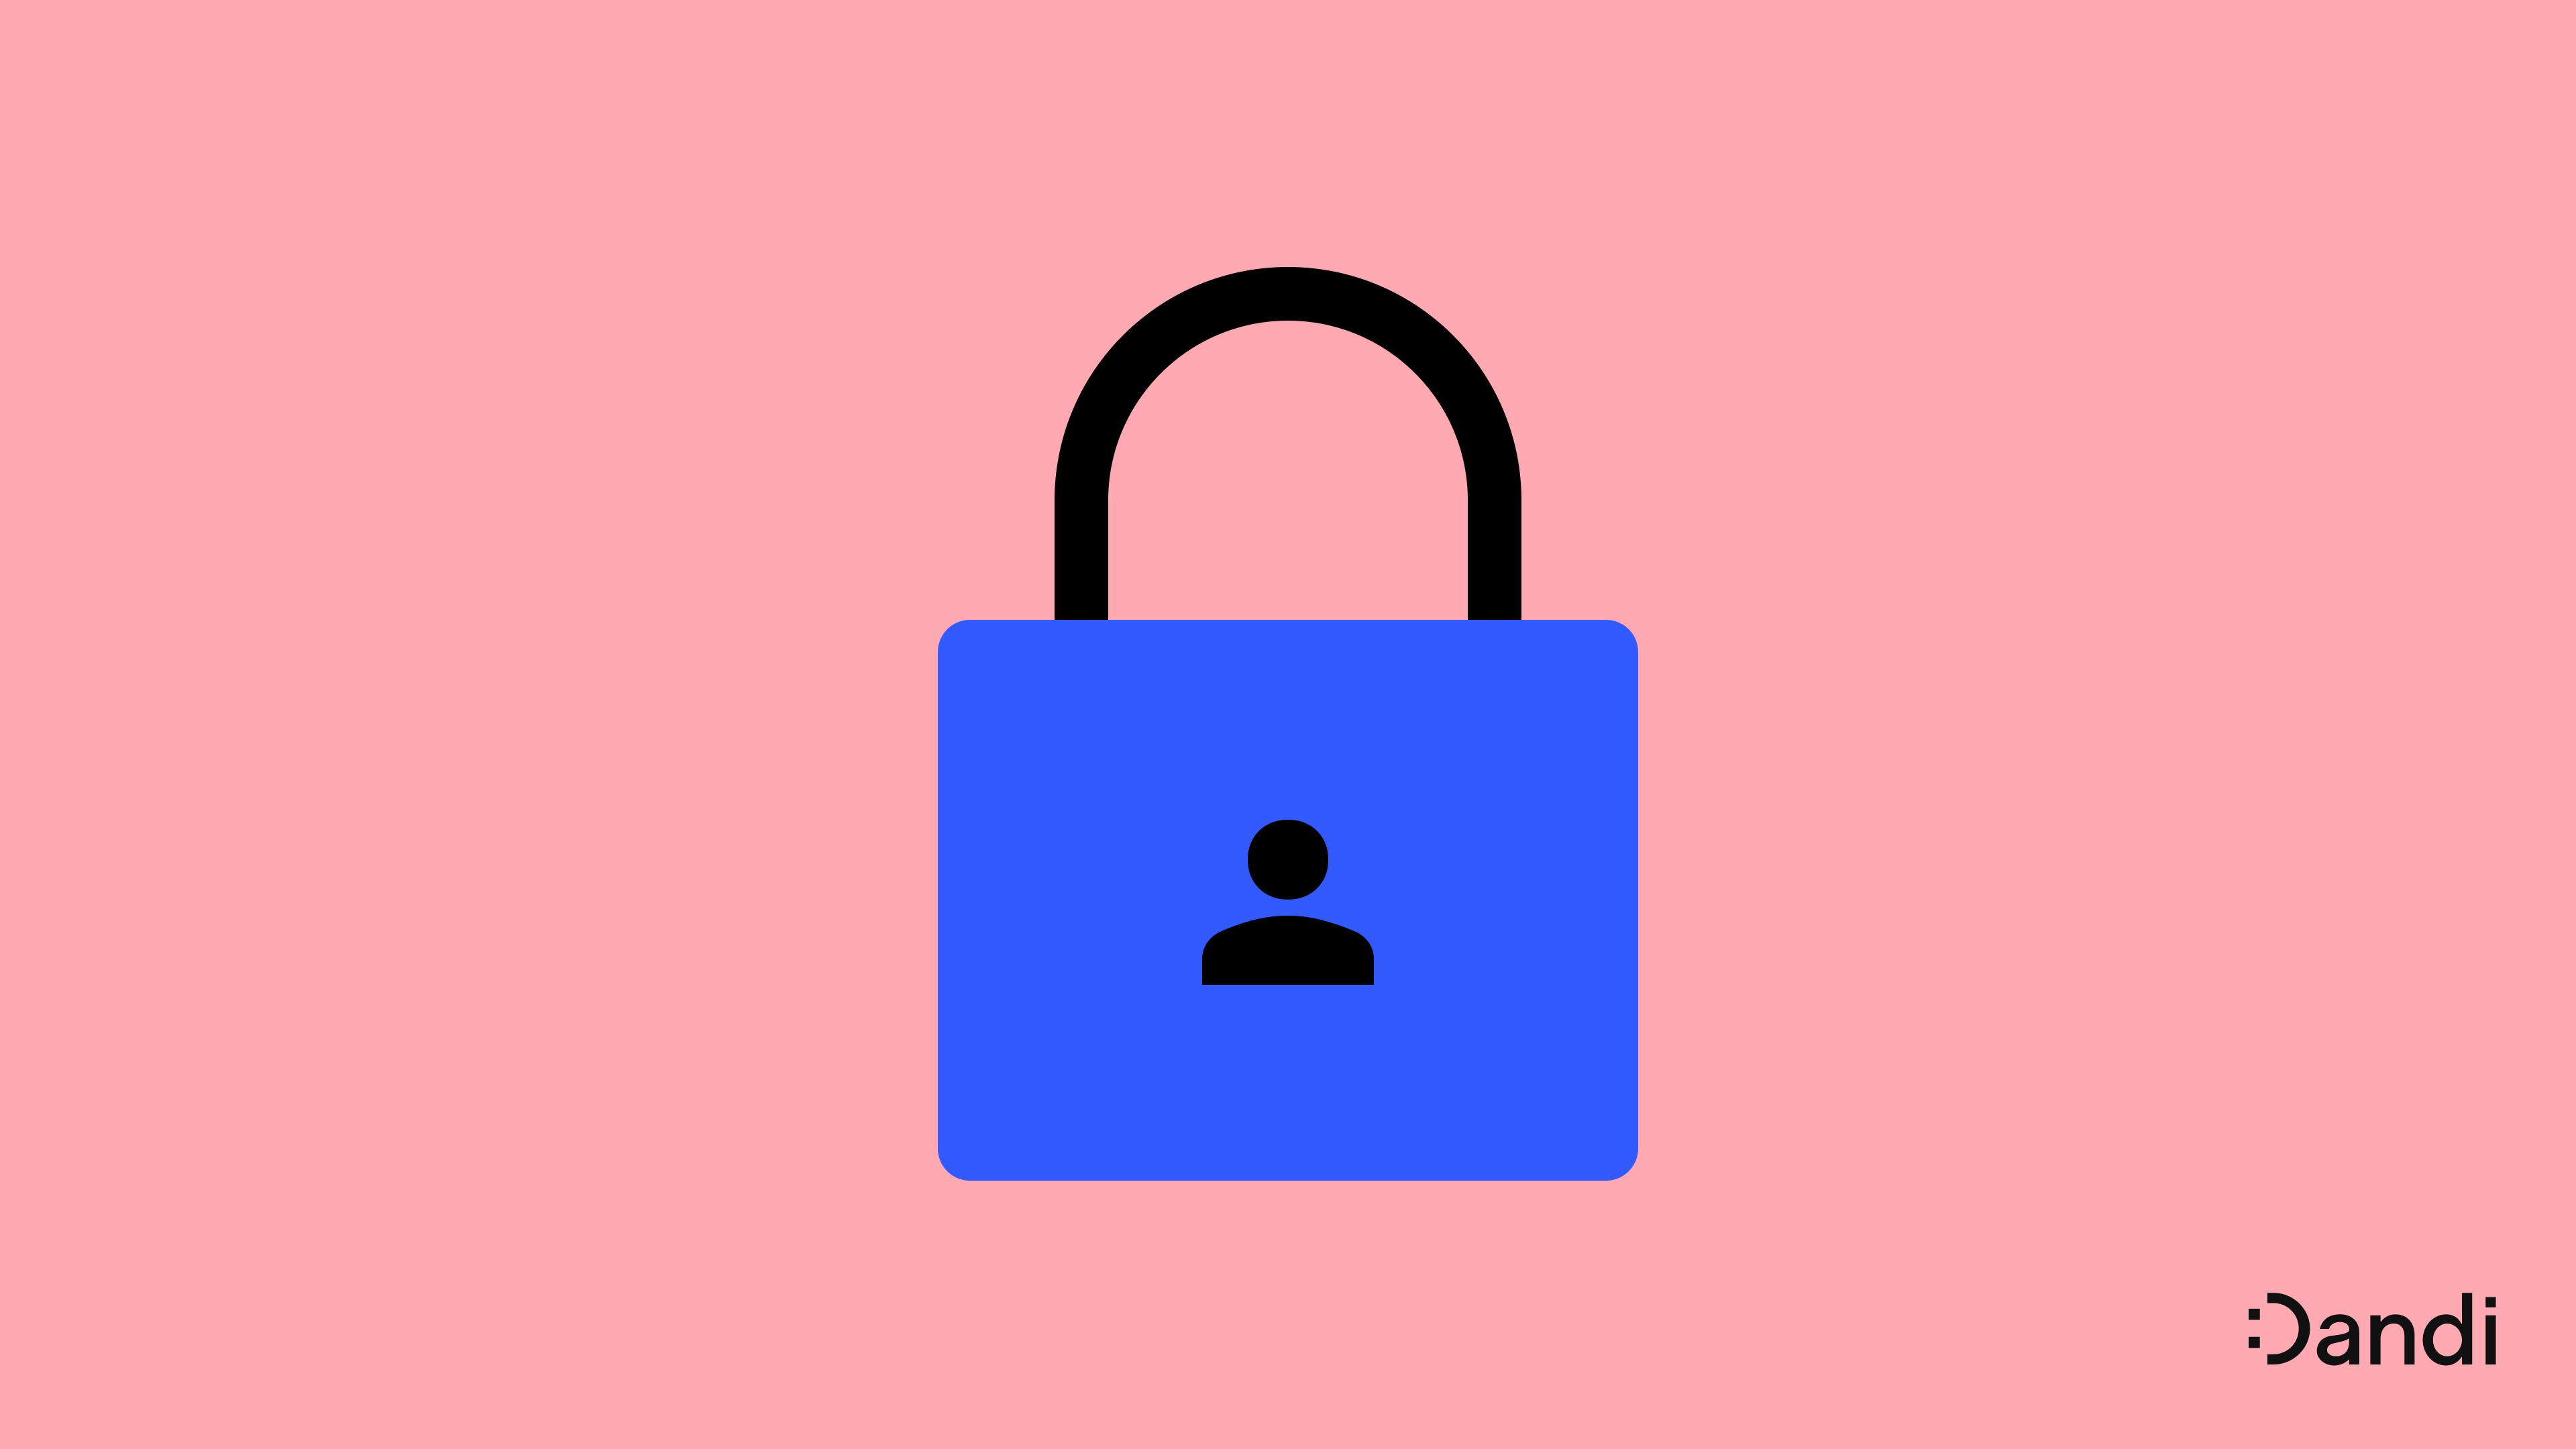 Illustration of padlock overlayed with icon of a person. The Dandi smiley logo is in the lower right corner. 